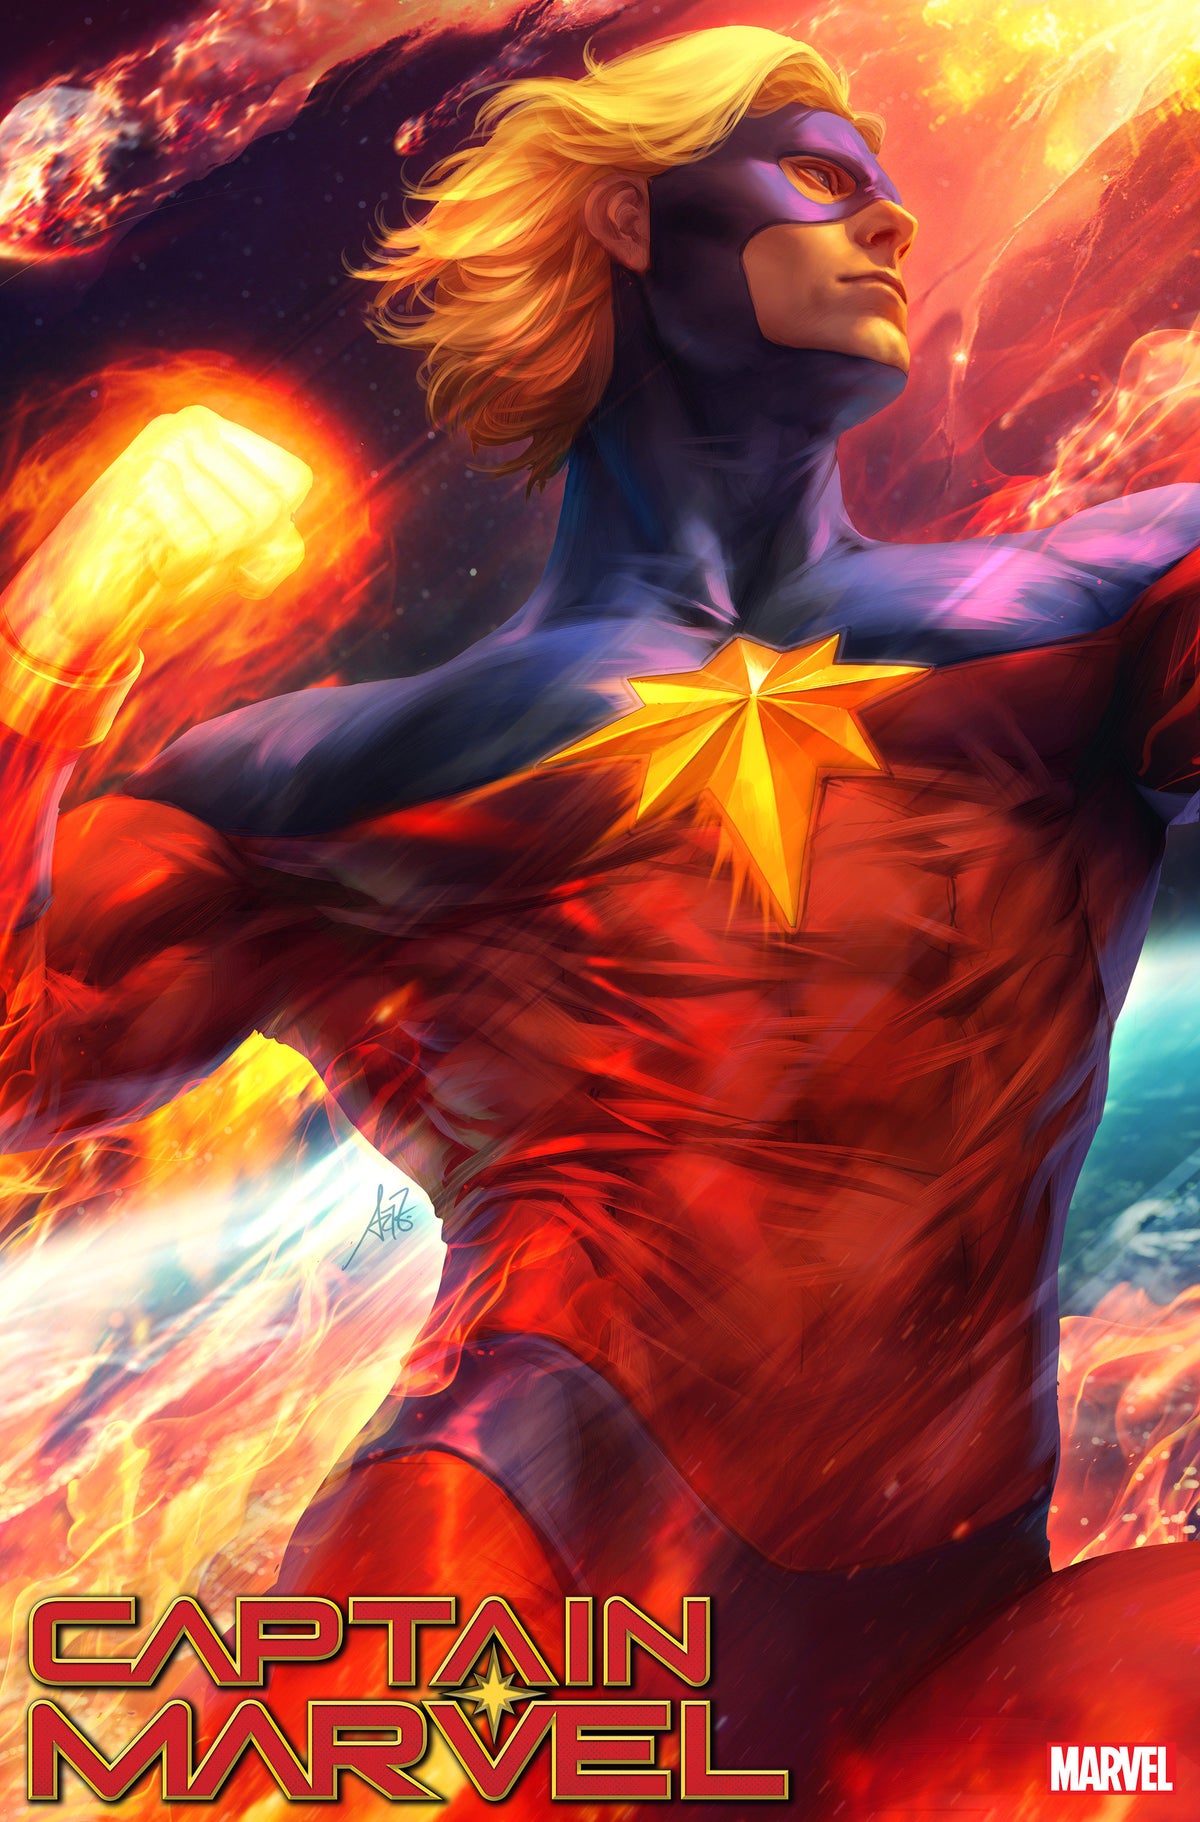 Image of Captain Marvel 34 Artgerm Teaser Variant comic sold by Stronghold Collectibles.